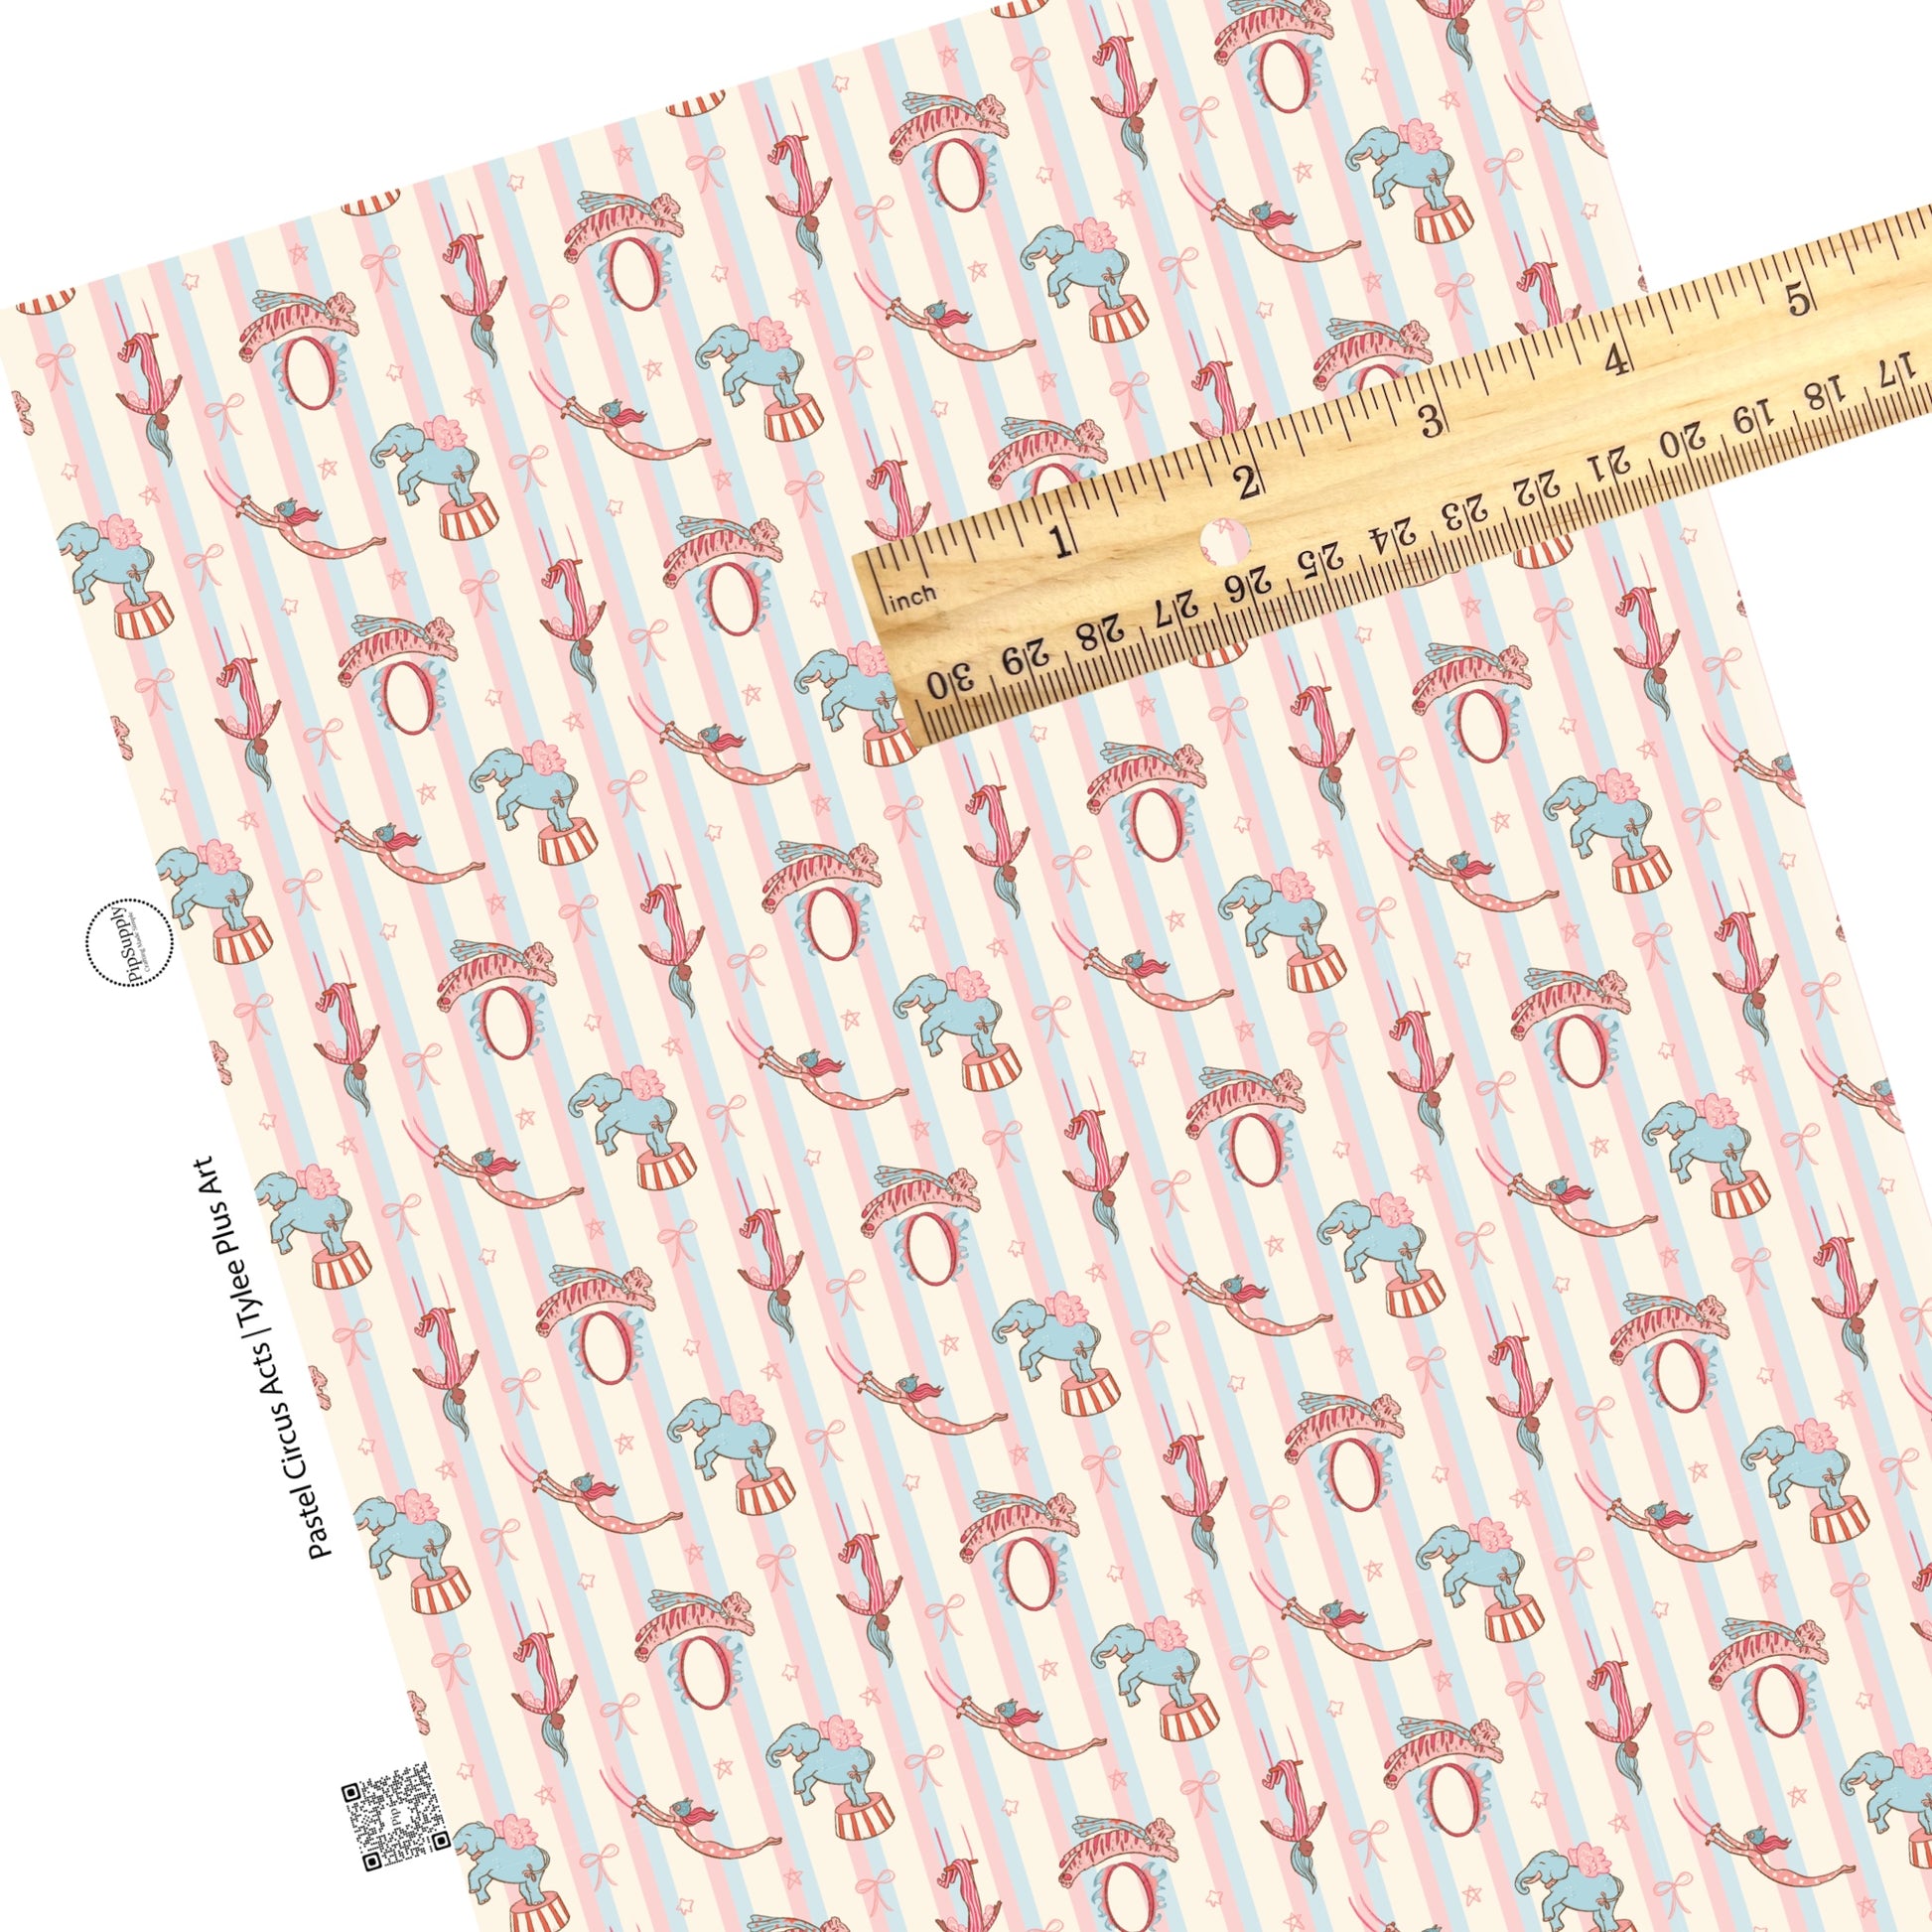 These stripe faux leather sheets contain the following design elements: circus animals on pastel pink, blue and cream stripes. Our CPSIA compliant faux leather sheets or rolls can be used for all types of crafting projects. 